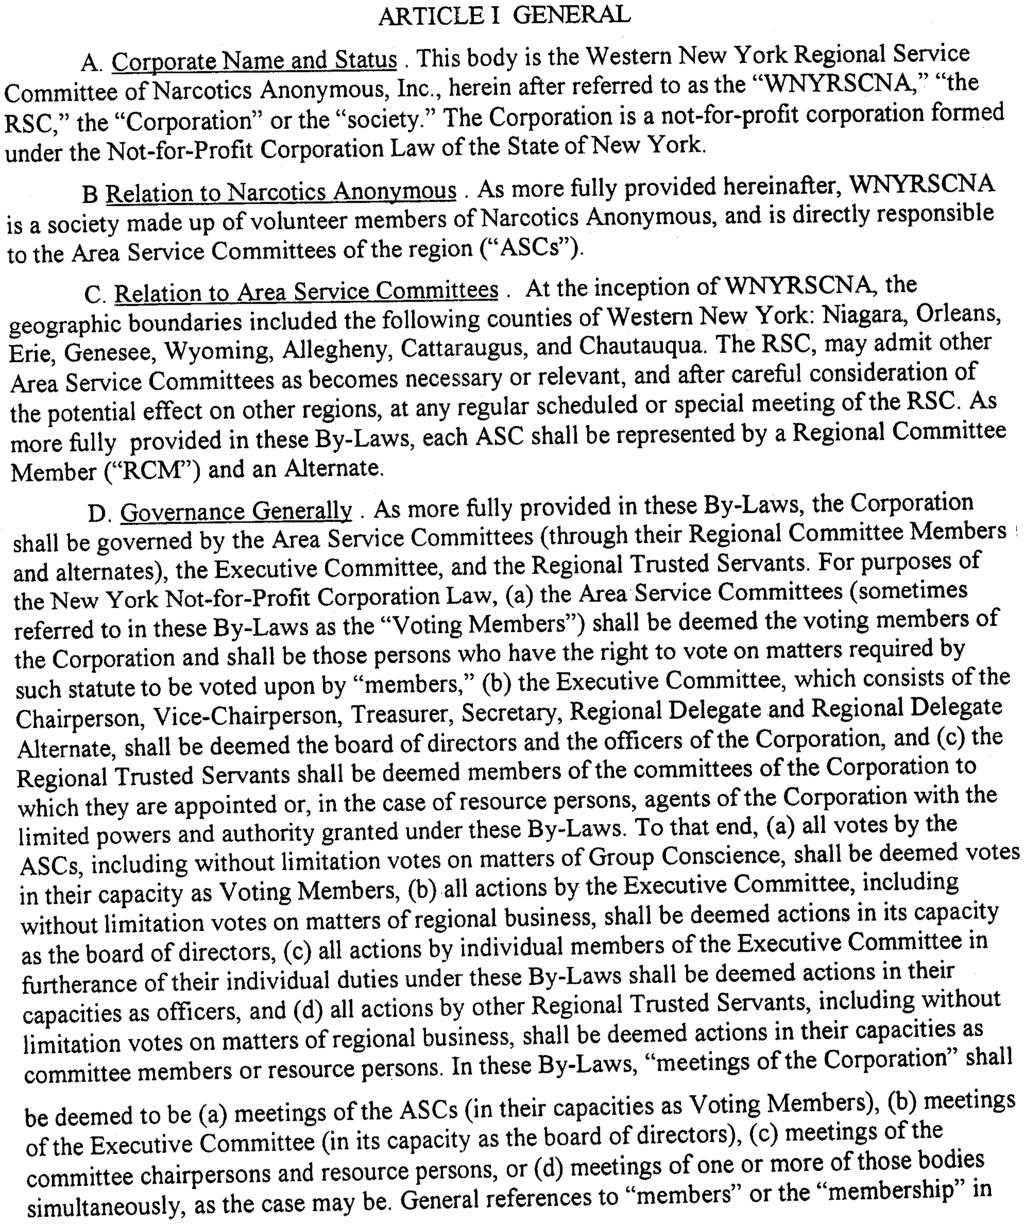 BY -LAWS of Western New York Regional Service Committee of Narcotics Anonymous, Inc. ARTICLE I GENERAL A. Corl2orate Name and Status.